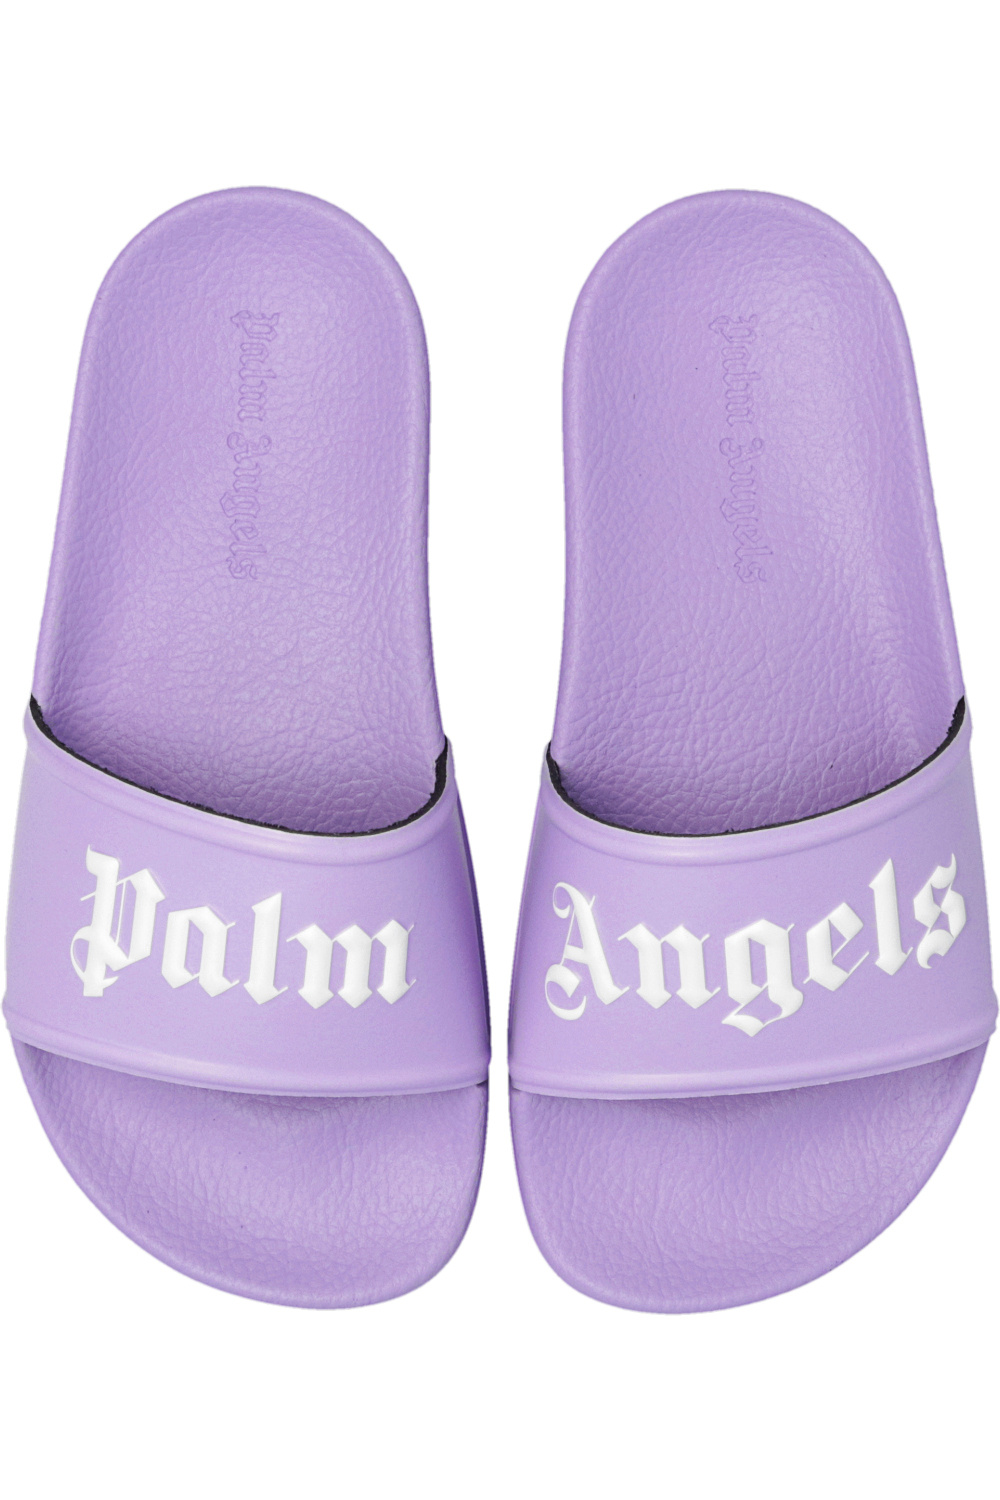 Palm Angels Kids Discover the collection